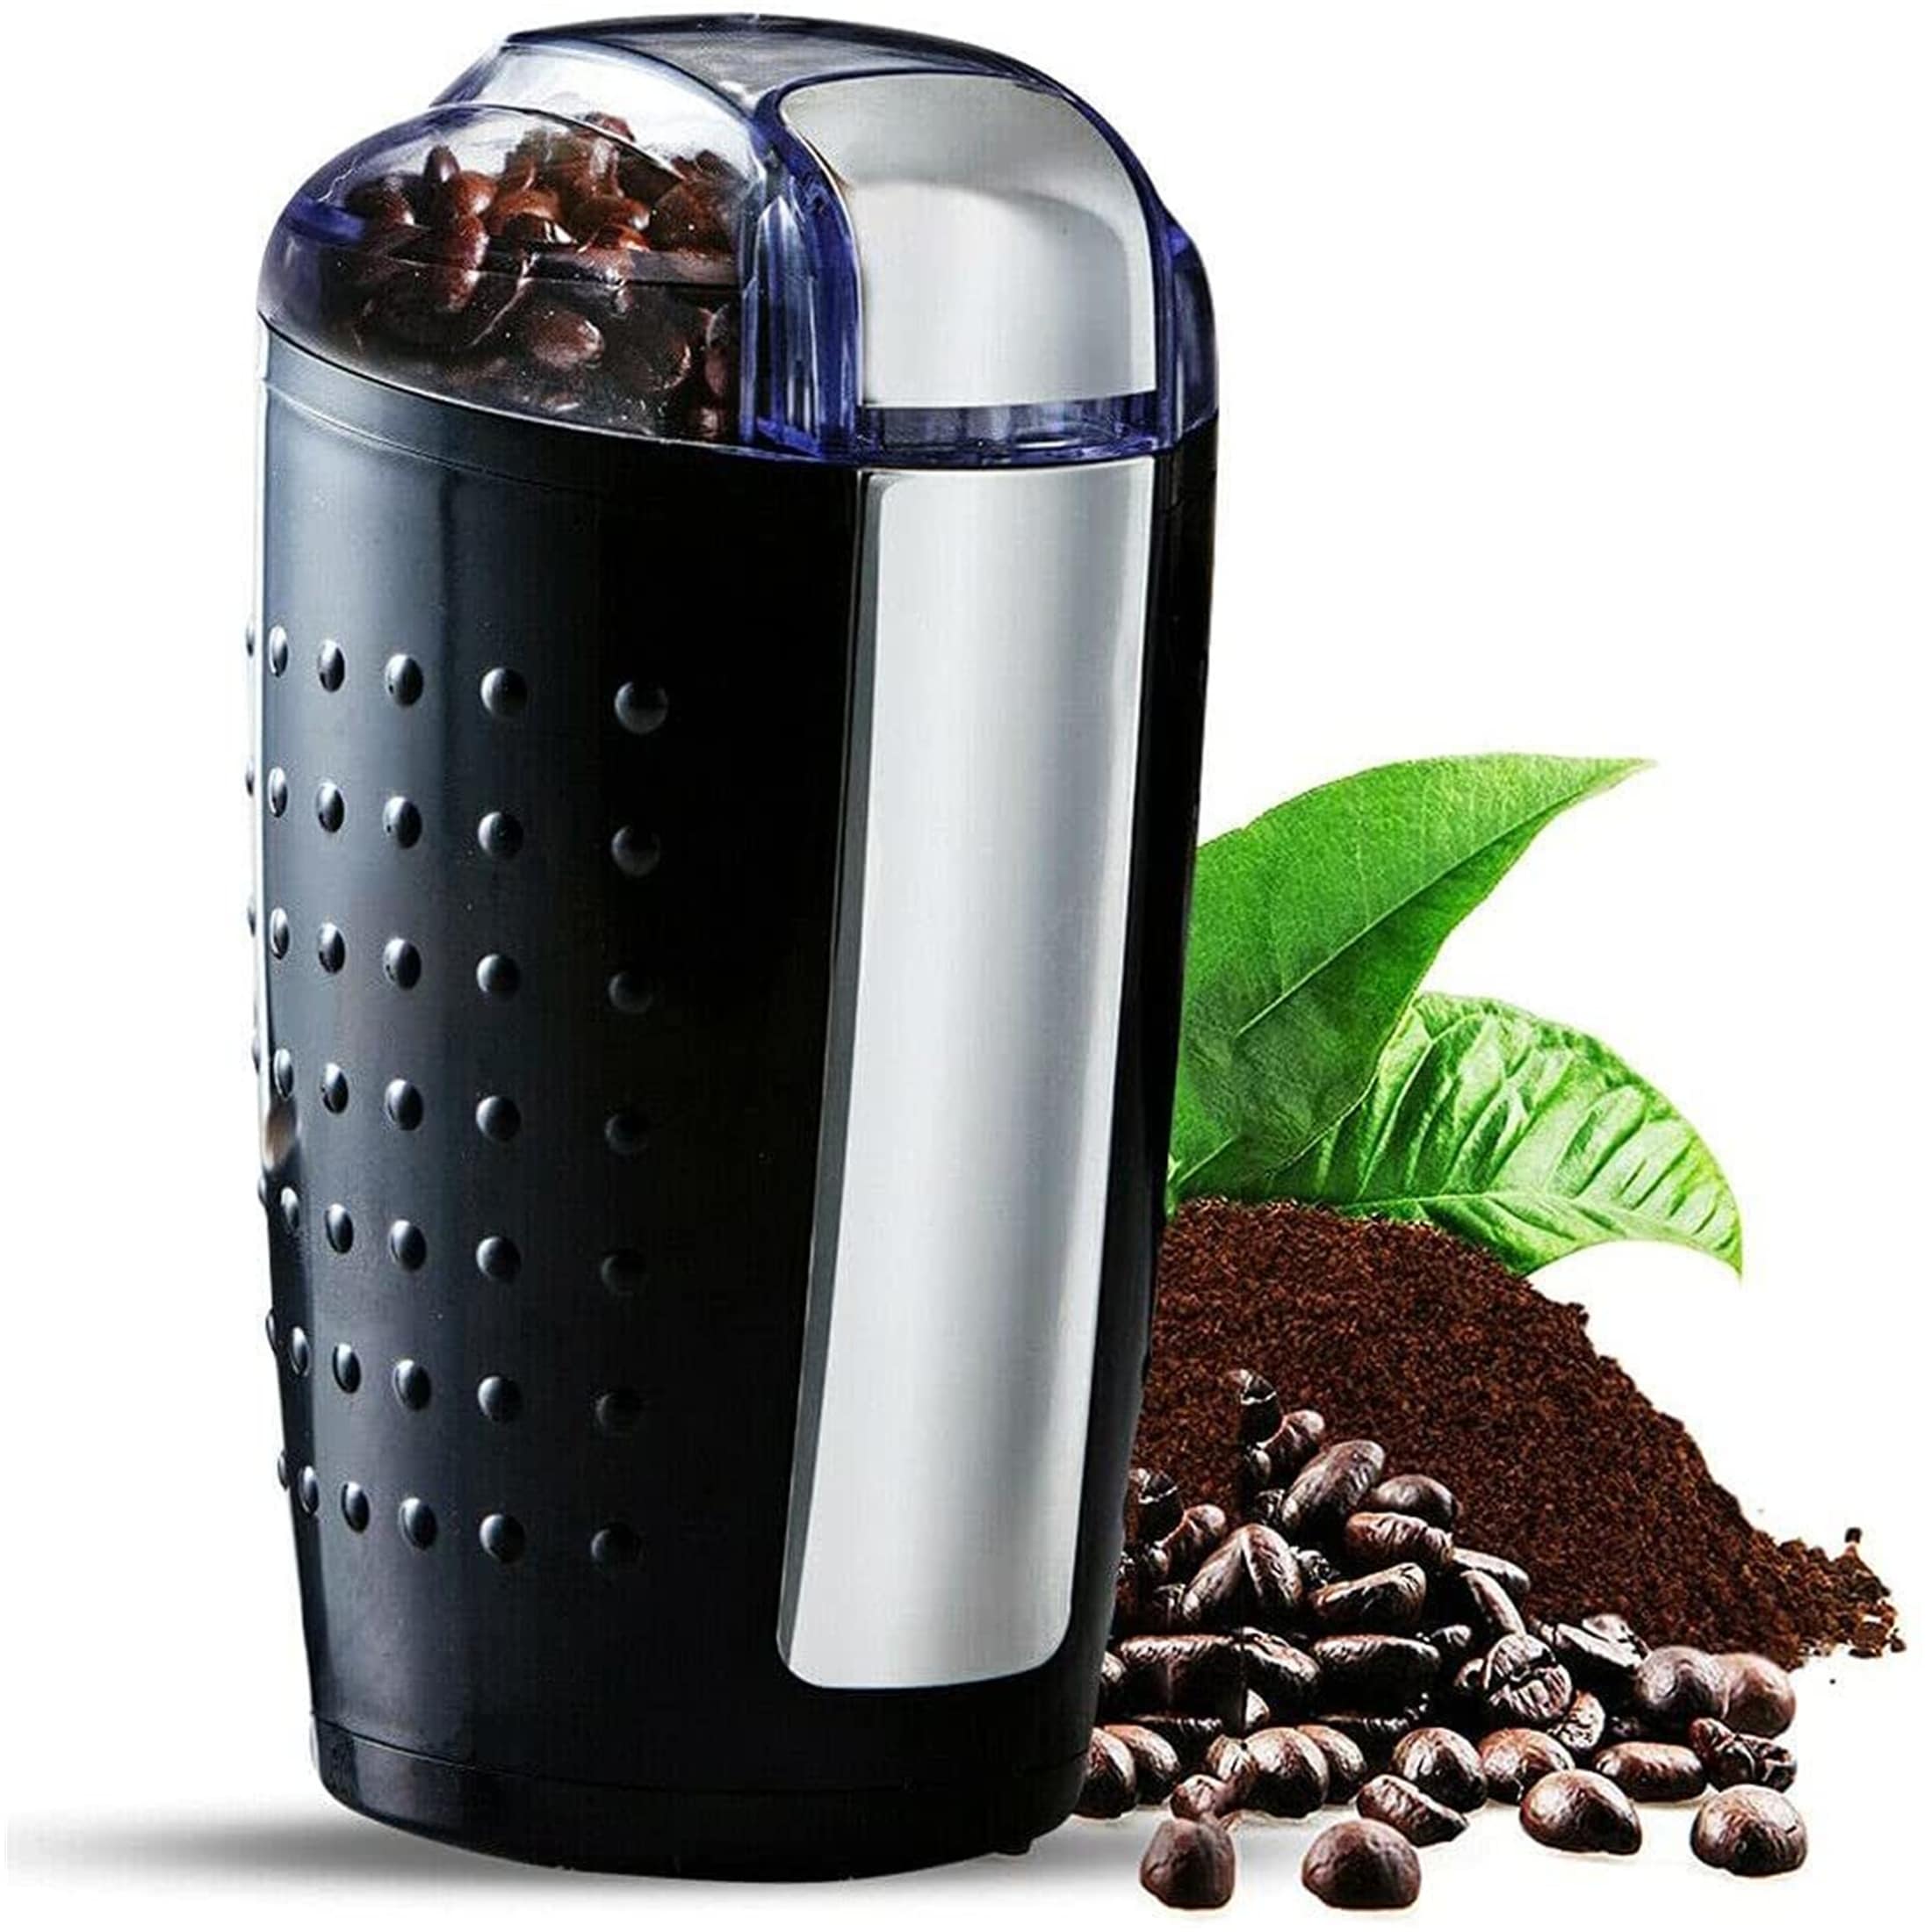 Mr. Coffee Burr Grinder Review: Can It Grind Up The Competition?